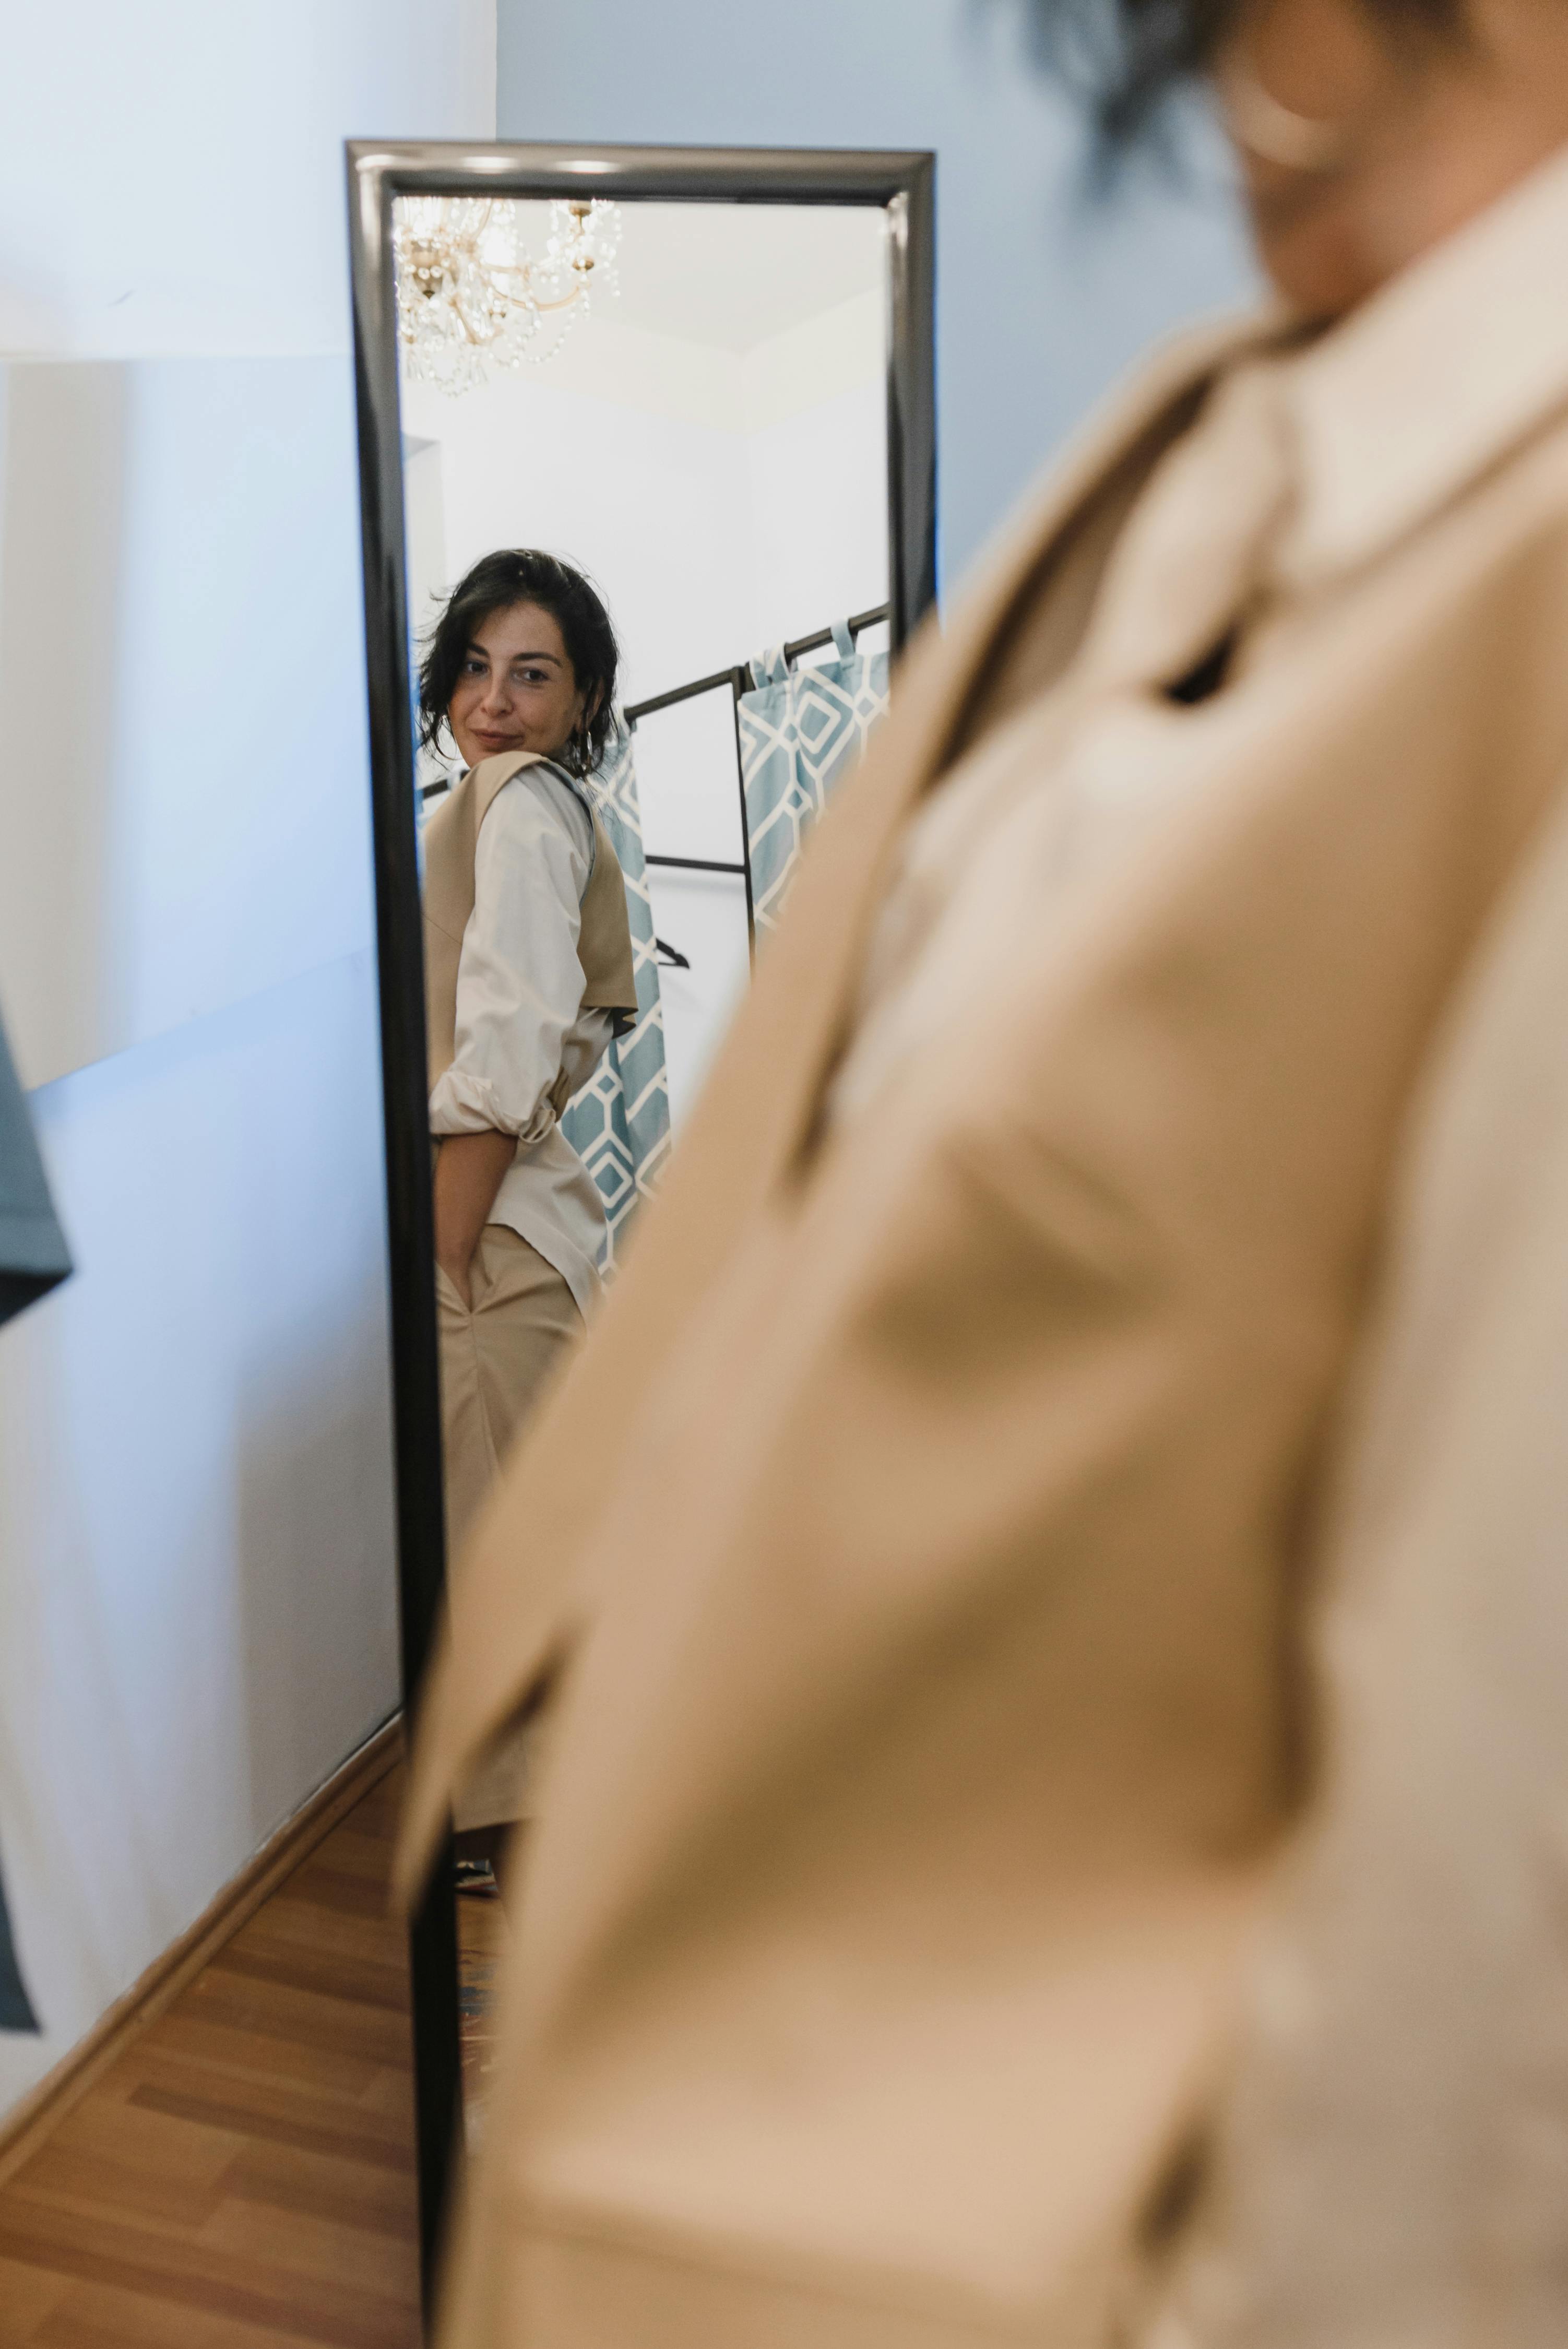 A woman checks her outfit in the mirror. For illustration purposes only | Source: Pexels